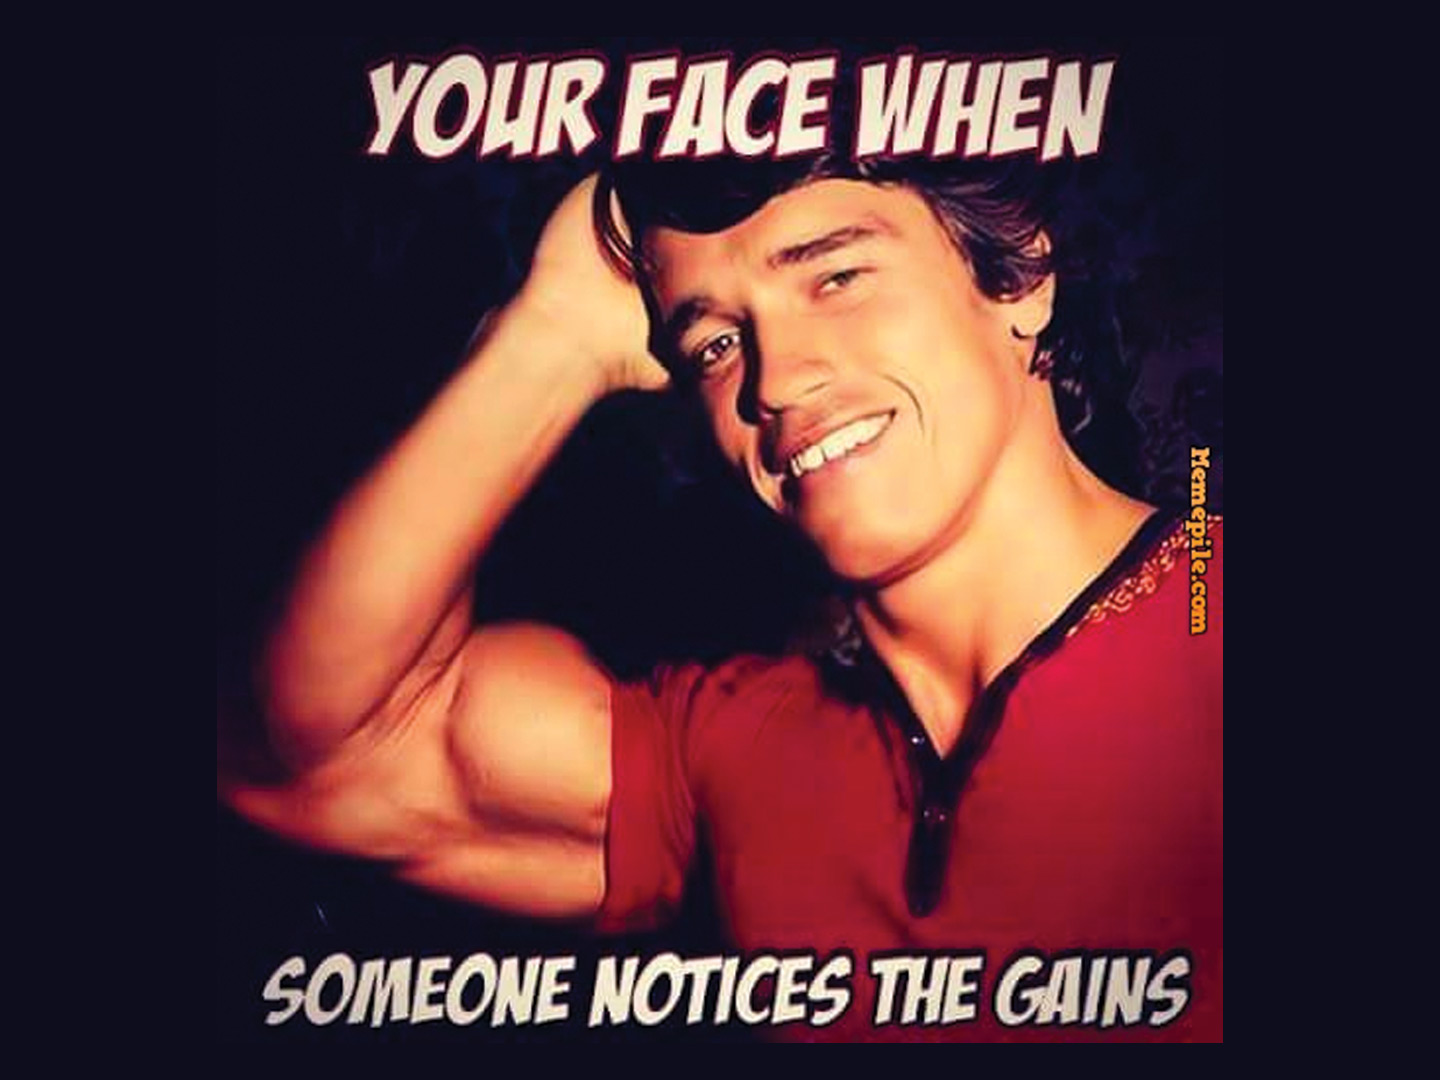 All About Them Gainz!